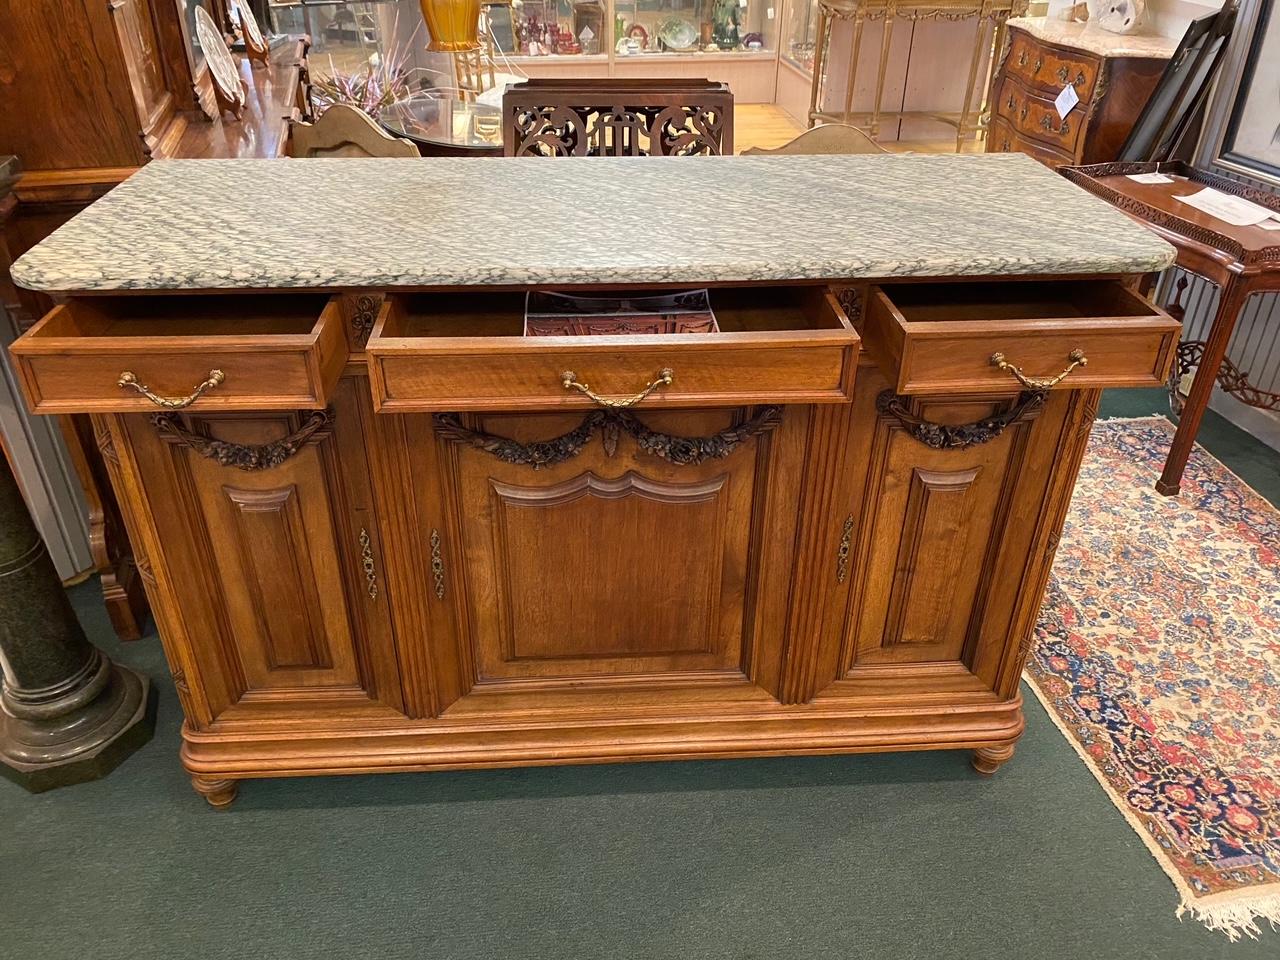 Beautiful French carved walnut console that can be used under a TV in a bedroom or family room or as a traditional sideboard in a dining room. This statement piece can work anywhere you want to make a statement. The solid marble is original and is